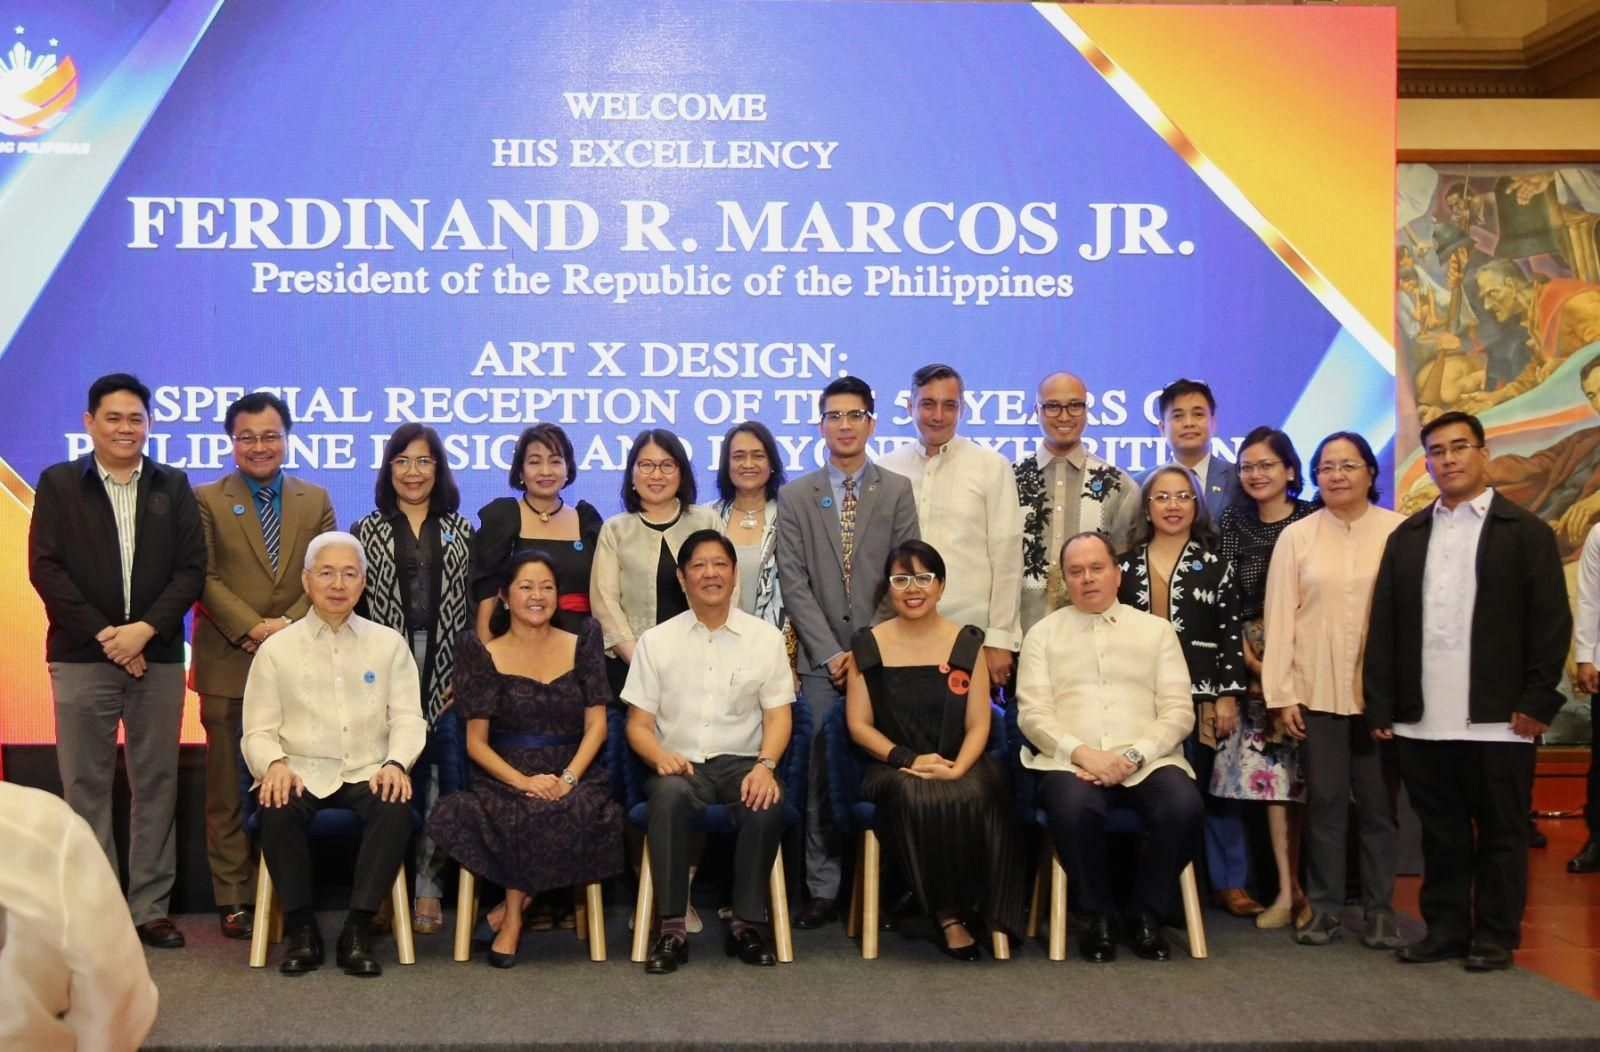 From L to R: DTI Secretary Fred Pascual, First Lady Liza Araneta-Marcos, President Ferdinand R. Marcos Jr., DCP Executive Director Maria Rita Matute and National Museum Chairman of BOT Andoni M. Aboitiz